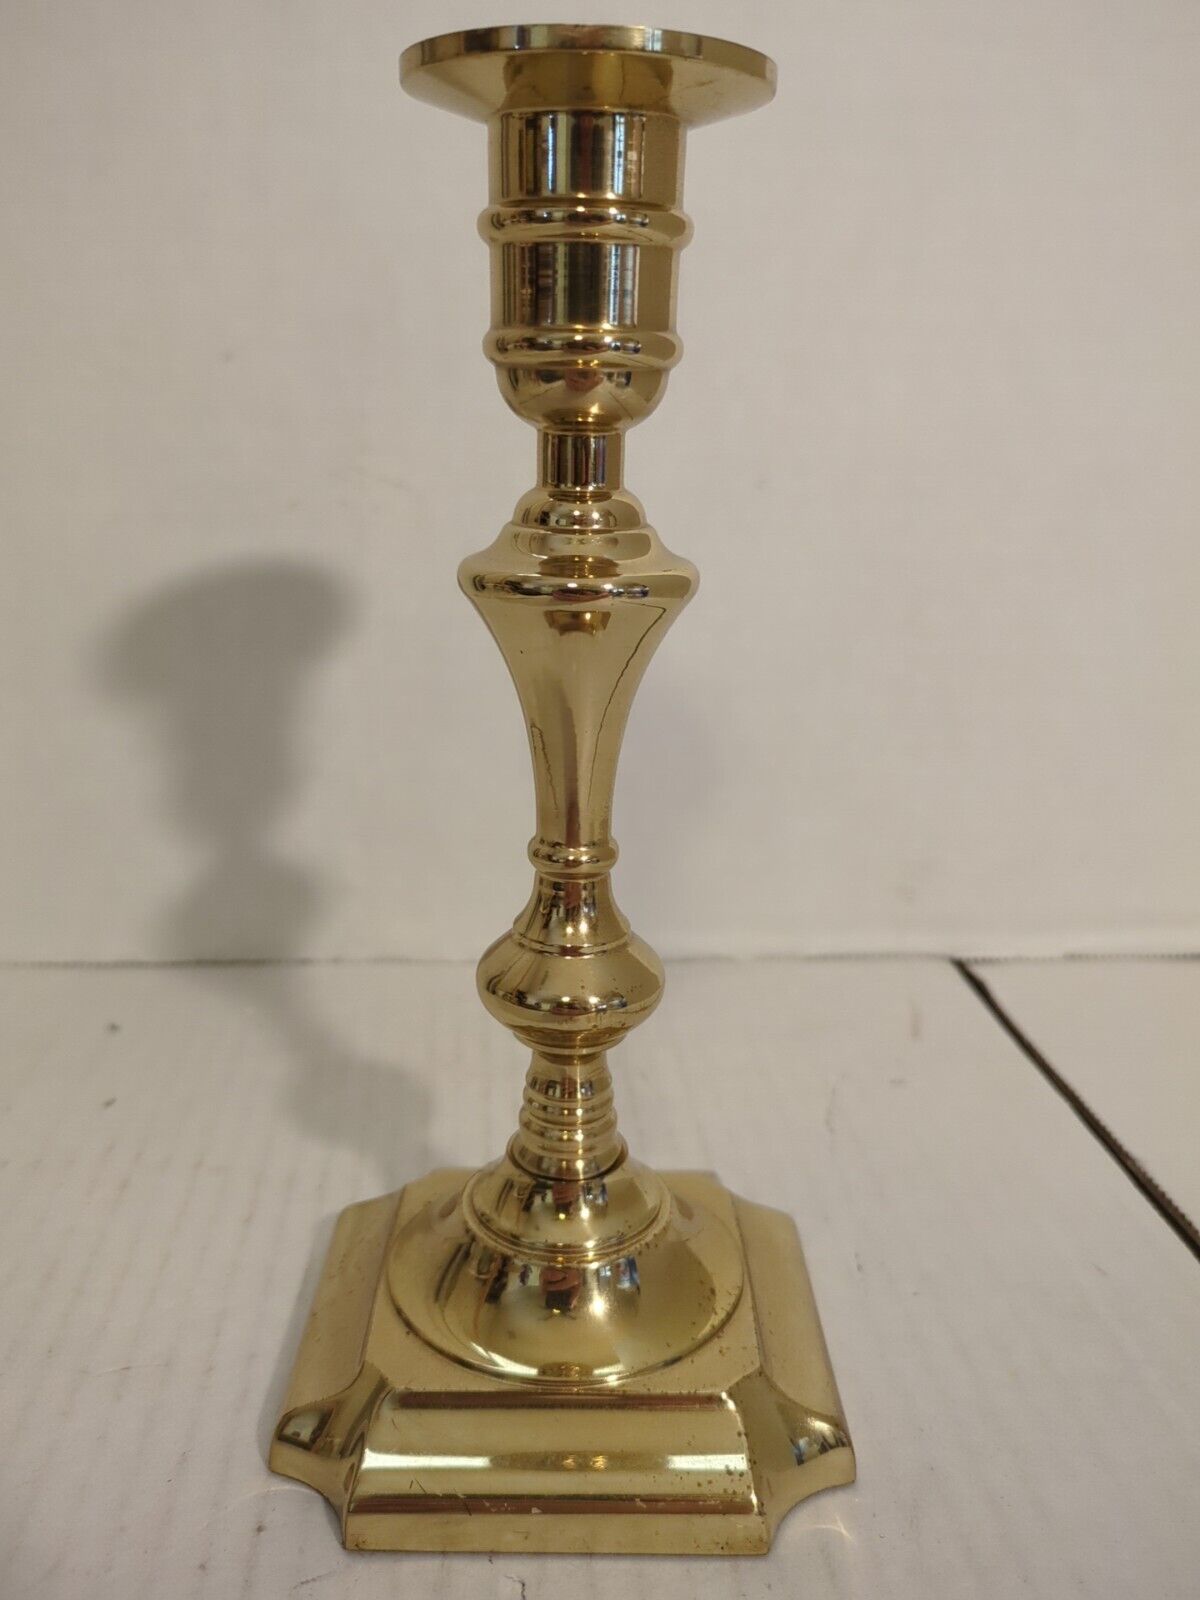 VALSAN Brass Candlestick Made In Portugal 7.5” Tall